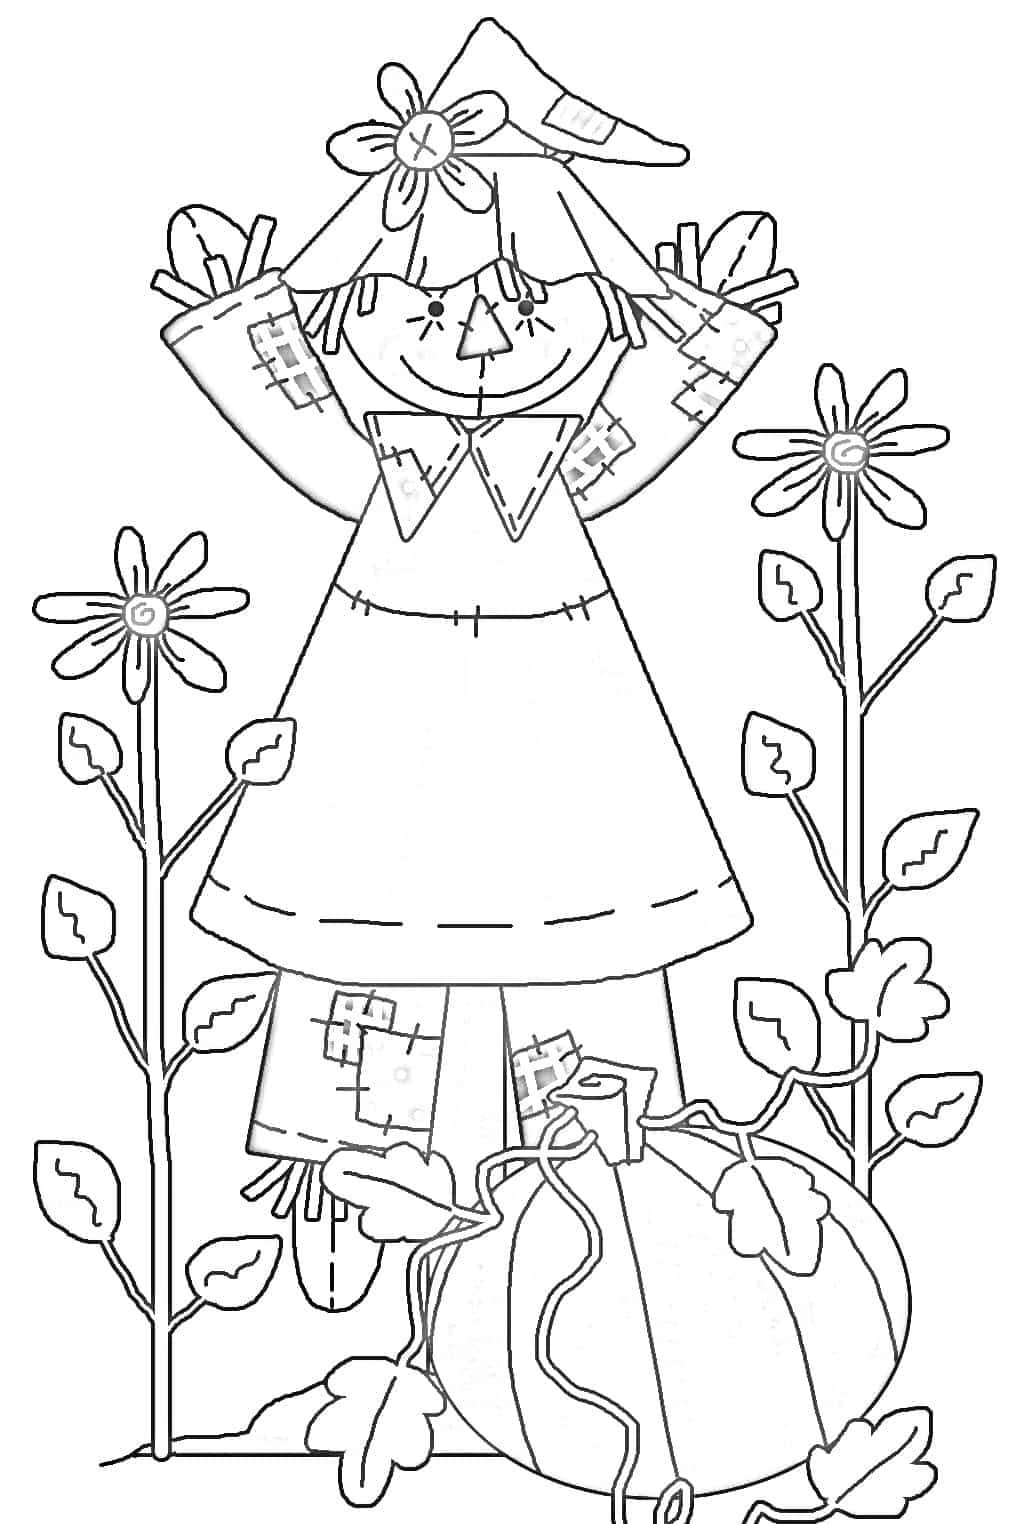 “Explore the Colors of Fall with this Free Printable Coloring Picture”